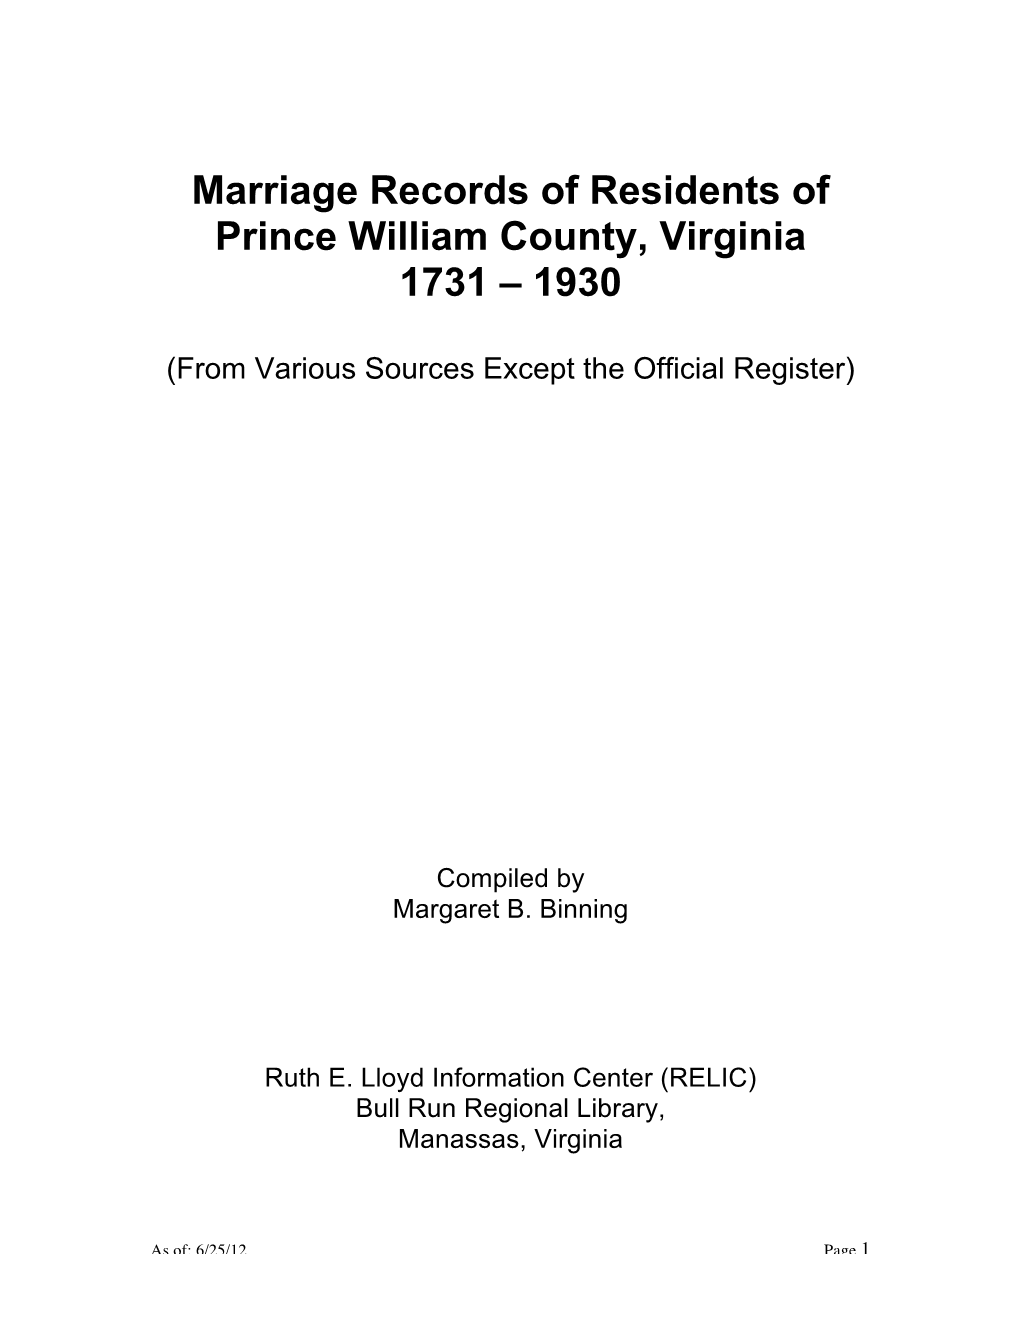 Marriages File